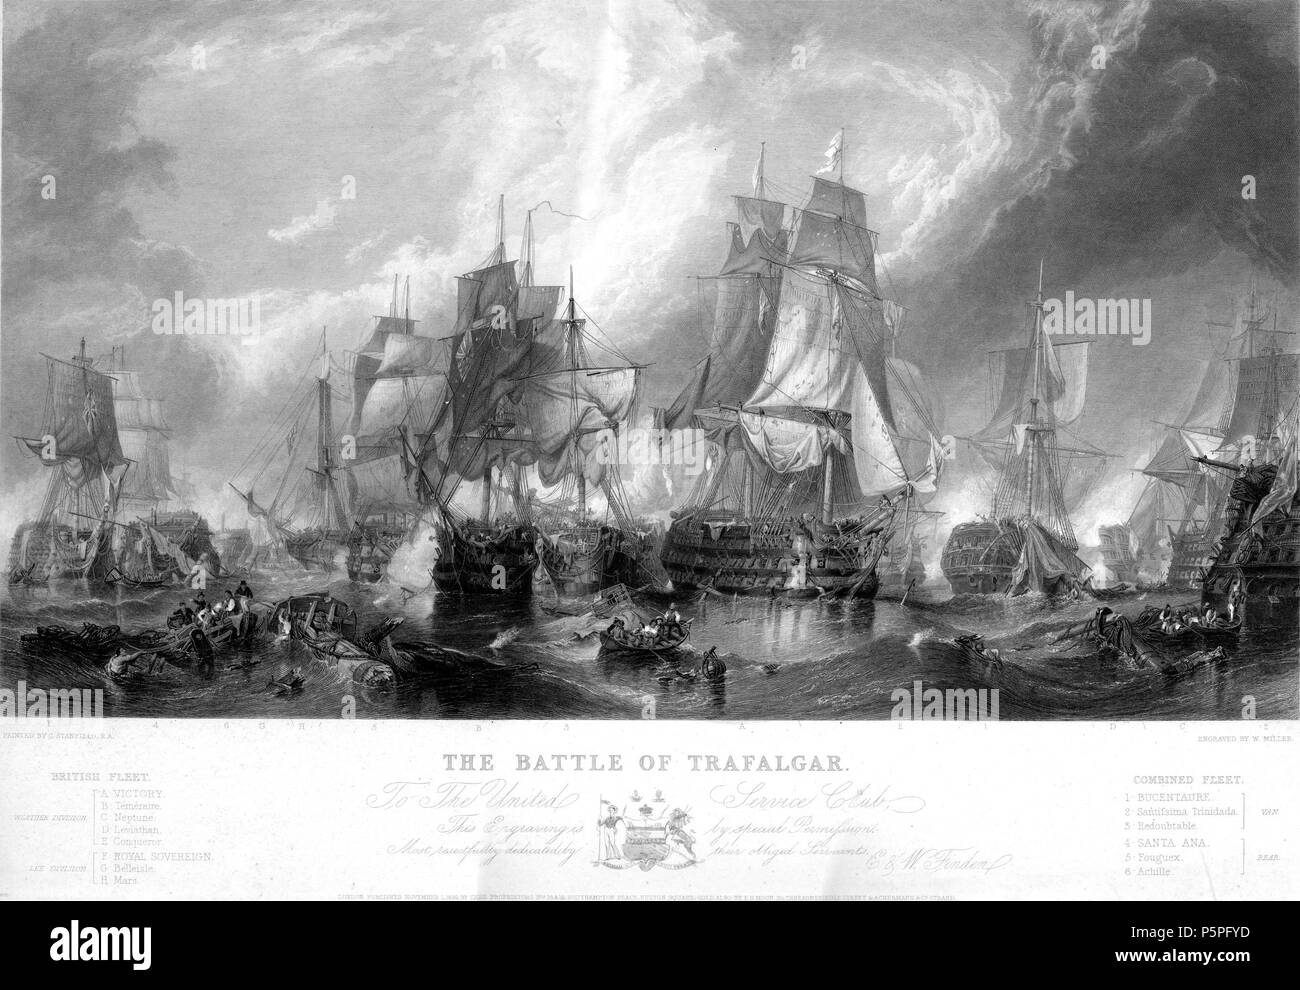 N/A. Battle of Trafalgar, engraving by William Miller (Miller paid £315-10-0 in viii-1839 for engraving), after Clarkson Stanfield, published in Finden's Royal Gallery of British Art, Published by the Proprietors, at 18 and 19, Southampton Place, Euston Square; sold by F. G. Moon, 20, Threadneedle Street, and Ackermann & Co., Strand, London, 1838-1849 . 1839.   William Miller  (1796–1882)     Alternative names William Frederick I Miller; William Frederick, I Miller  Description Scottish engraver  Date of birth/death 28 May 1796 20 January 1882  Location of birth/death Edinburgh Sheffield  Auth Stock Photo